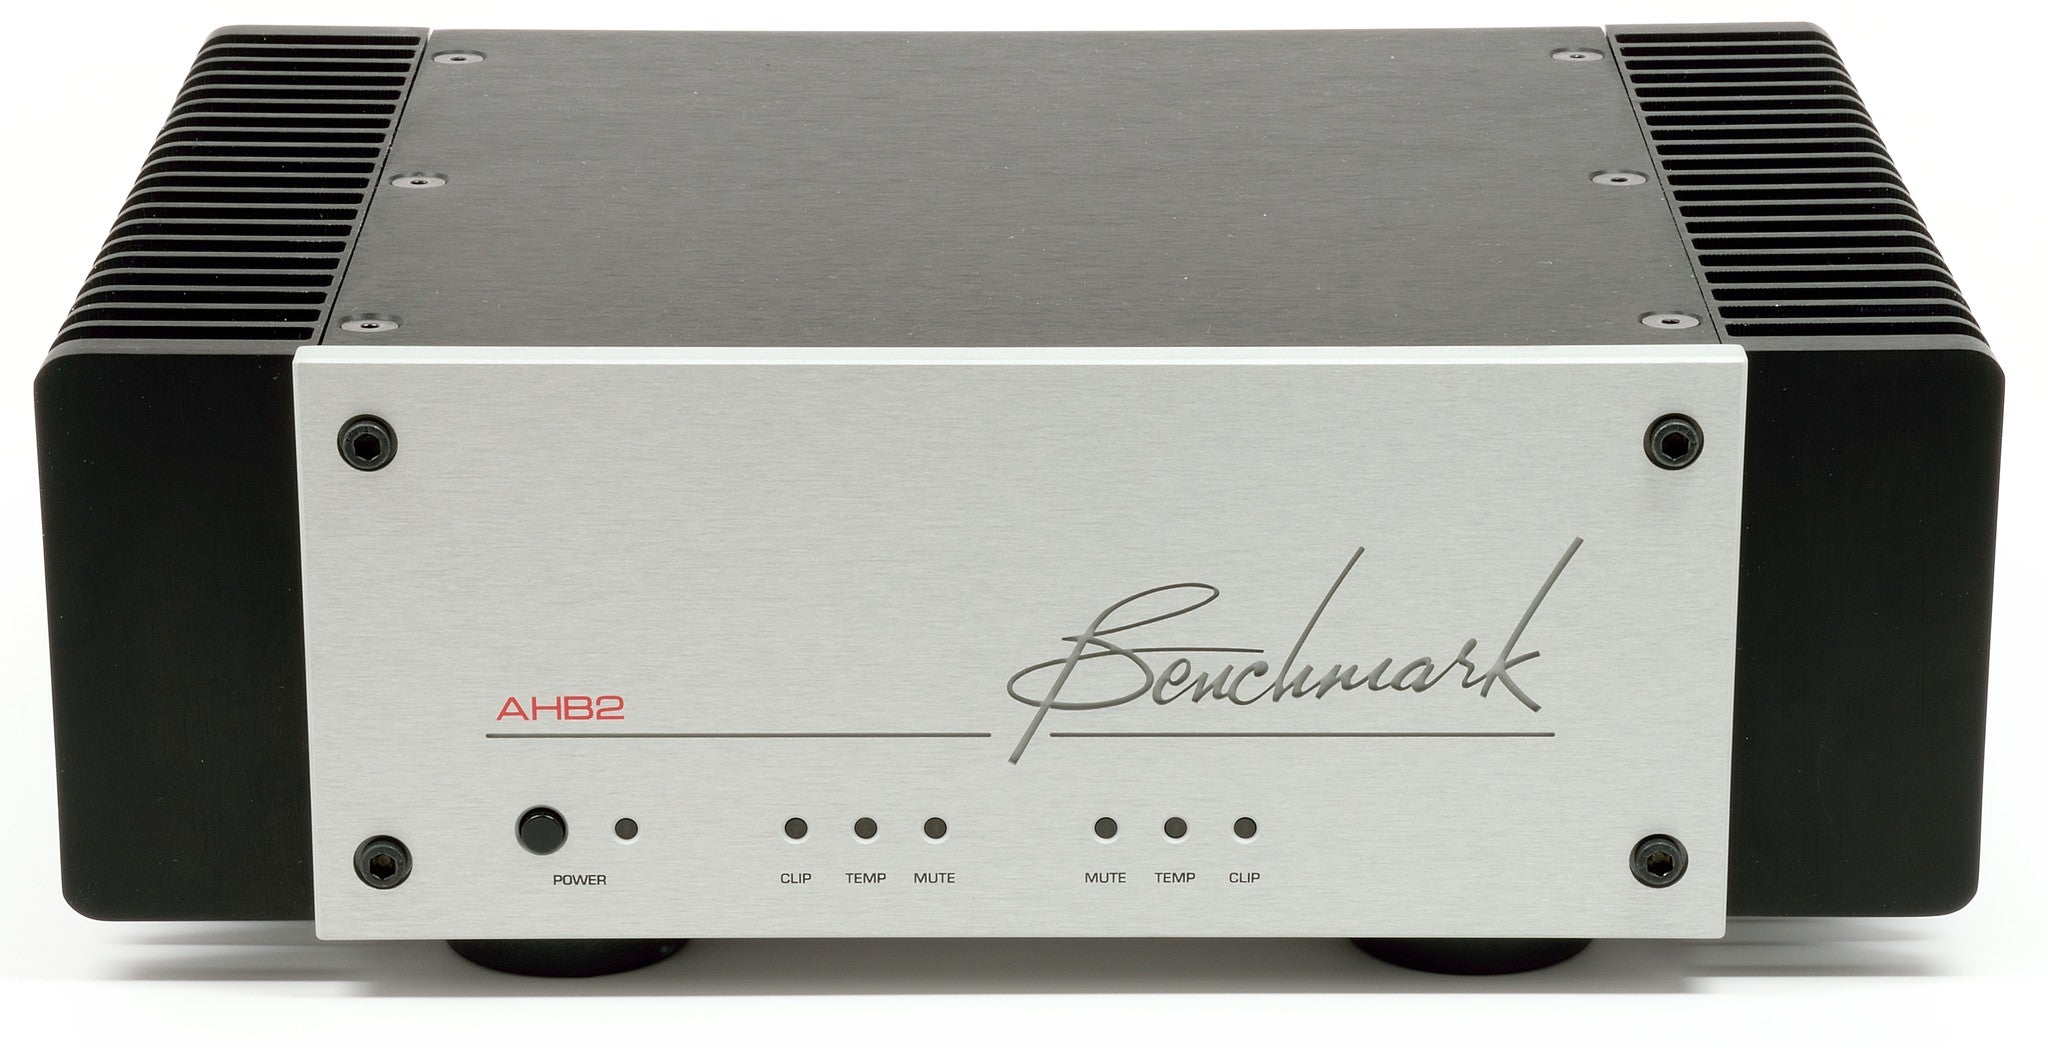 Benchmark AHB2 Top Front